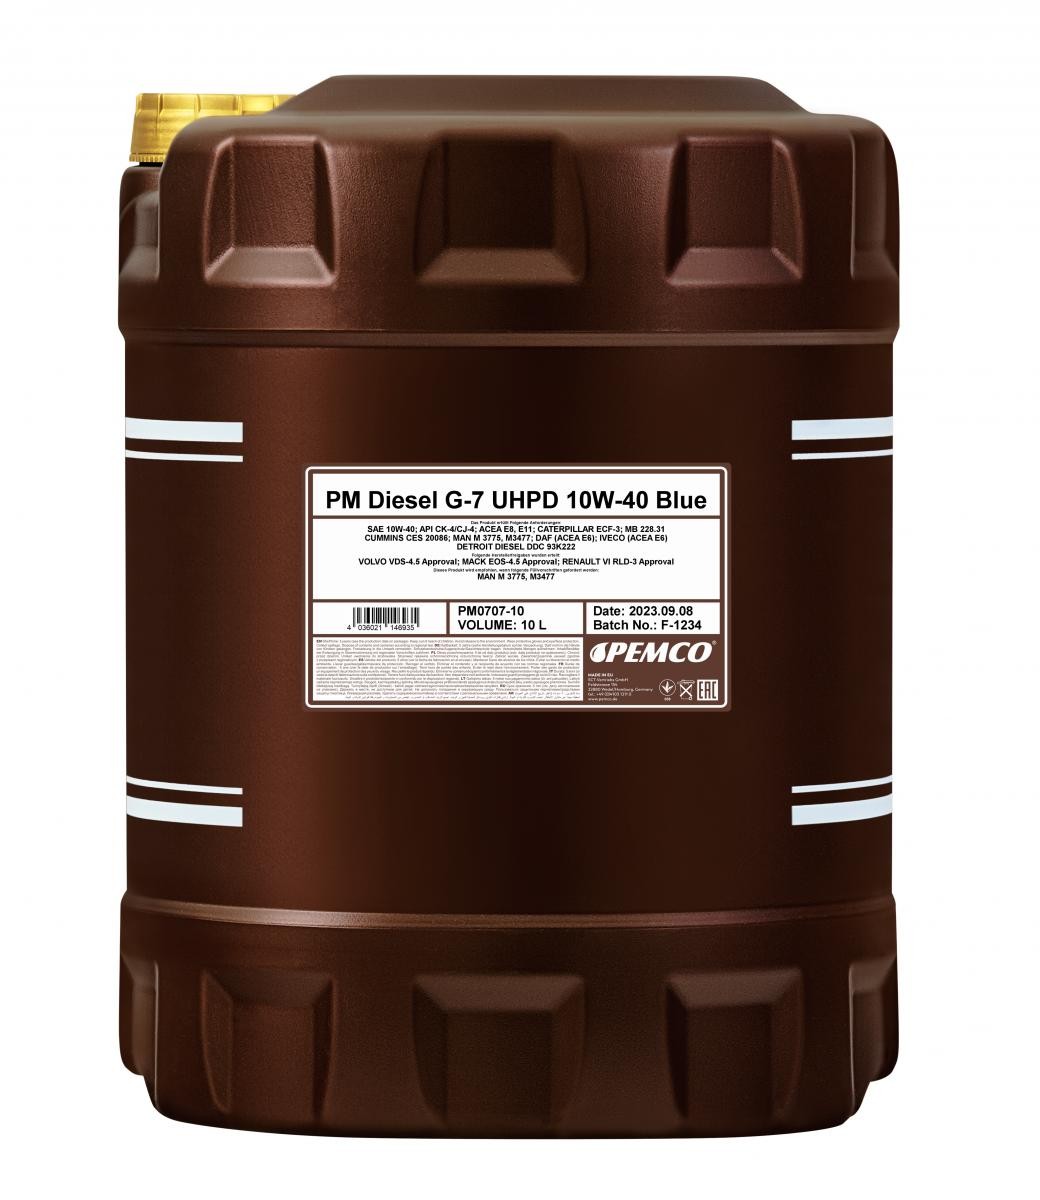 Auto oil MB 228.51 PEMCO - PM0707-10 Truck UHPD, DIESEL G-7 Blue